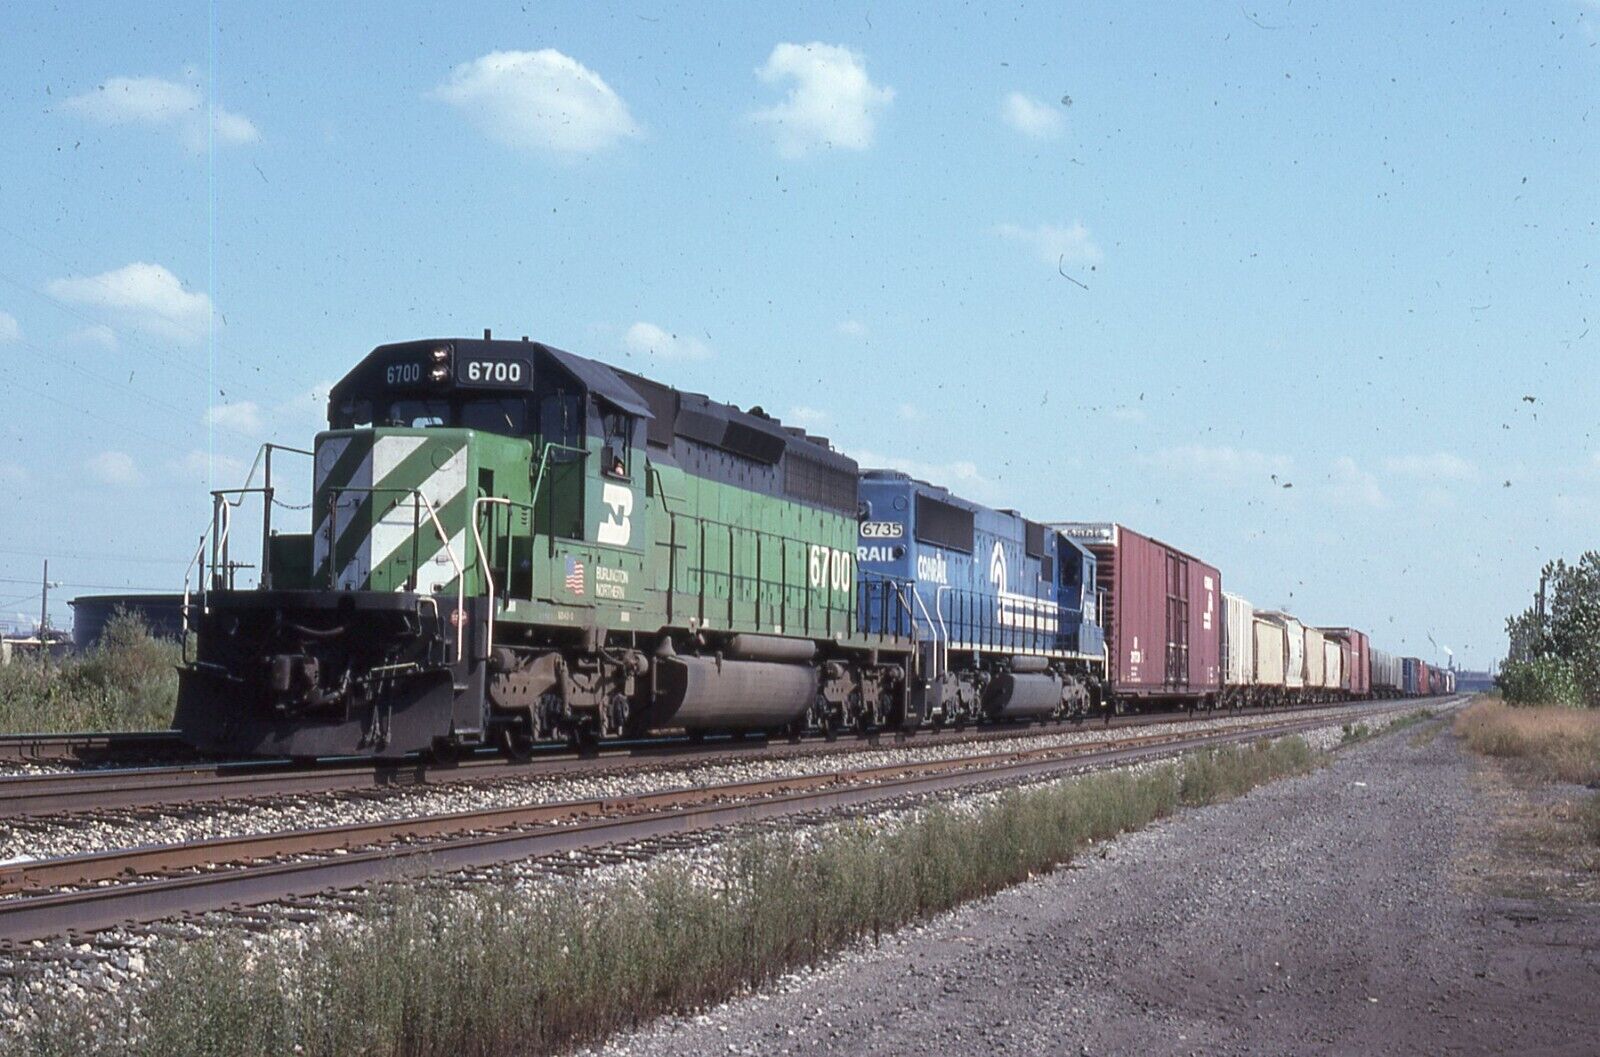 BURLINGTON NORTHERN ACTION     SD40-2 #6700 w/Train  Whiting, IN  09/16/95